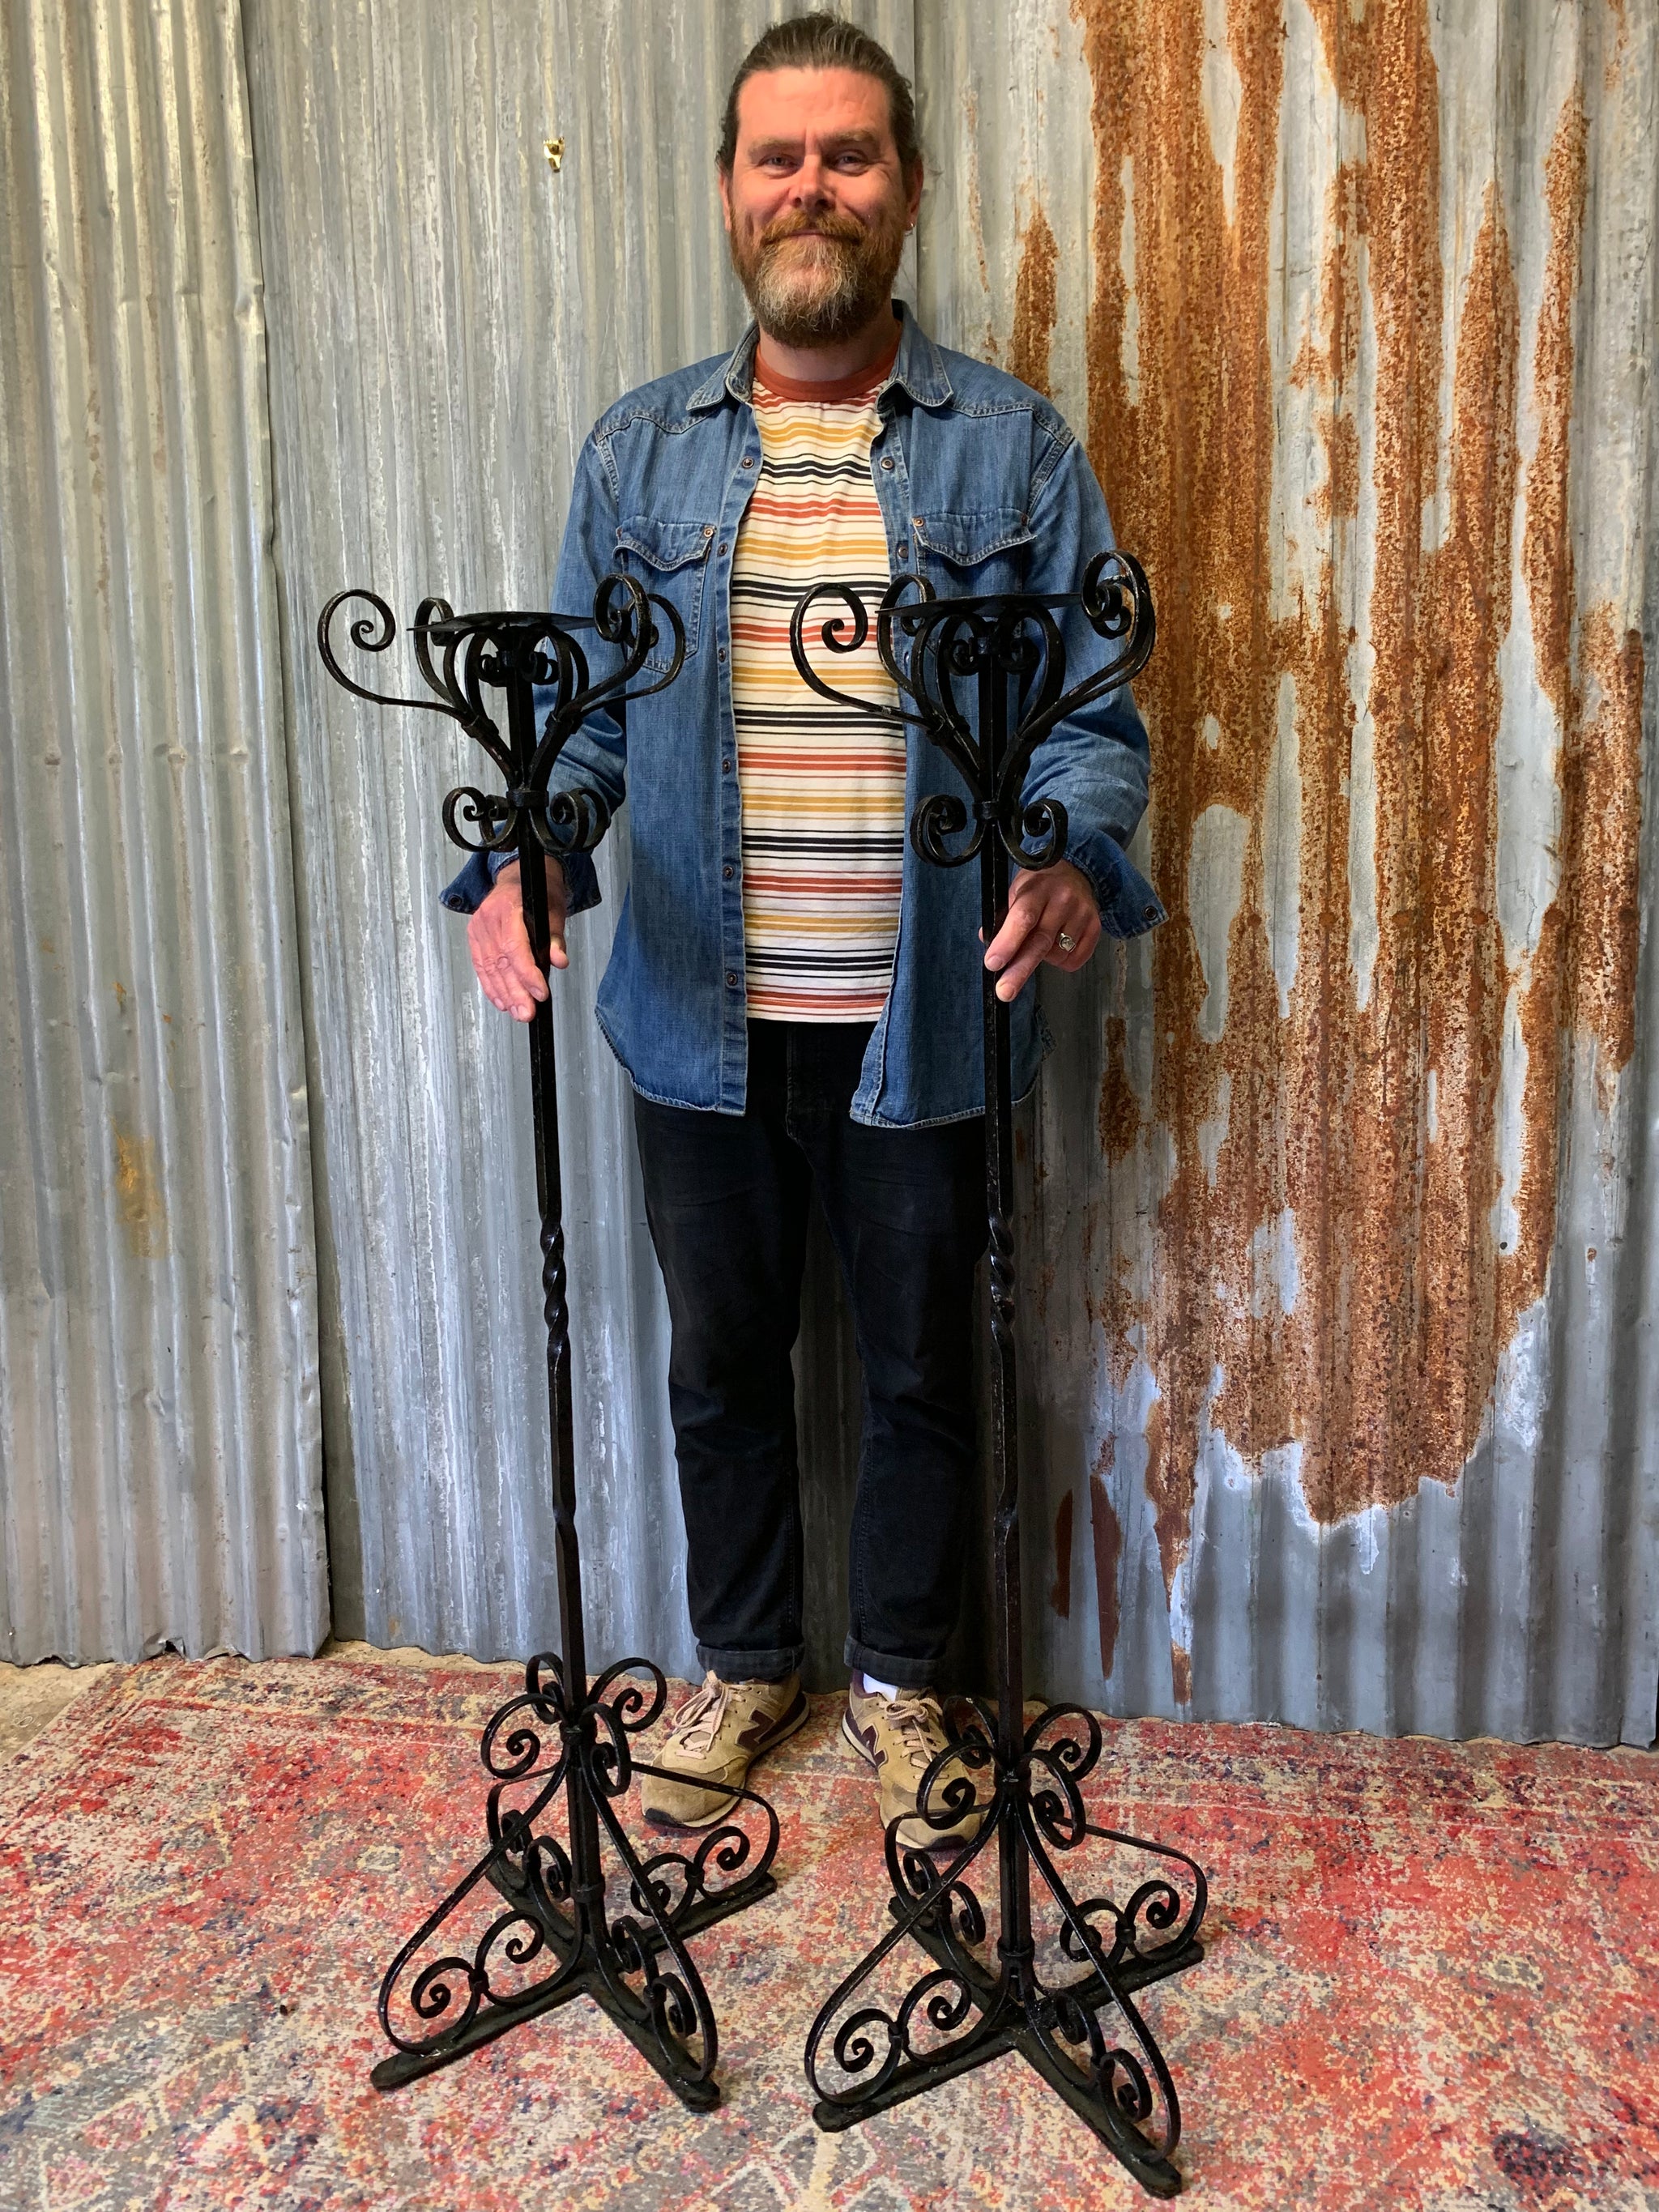 A pair of wrought iron Gothic candlesticks - Belle and Beast Emporium